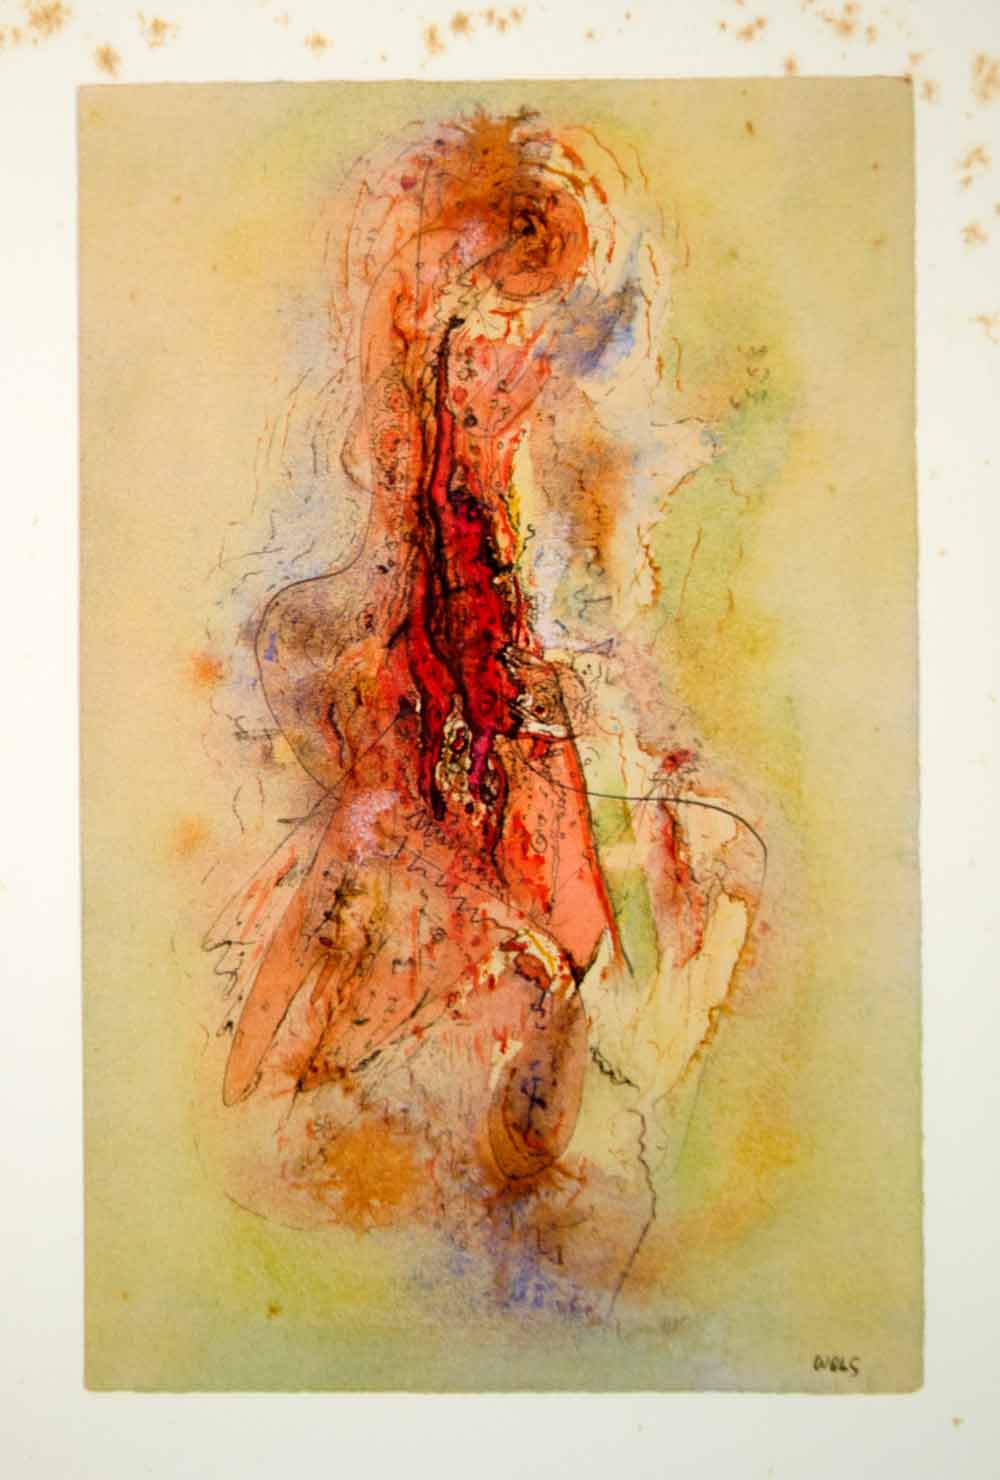 1965 Photolithograph Wols A. O. Wolfgang Schulze Wound Plaie Abstract Art WOL1